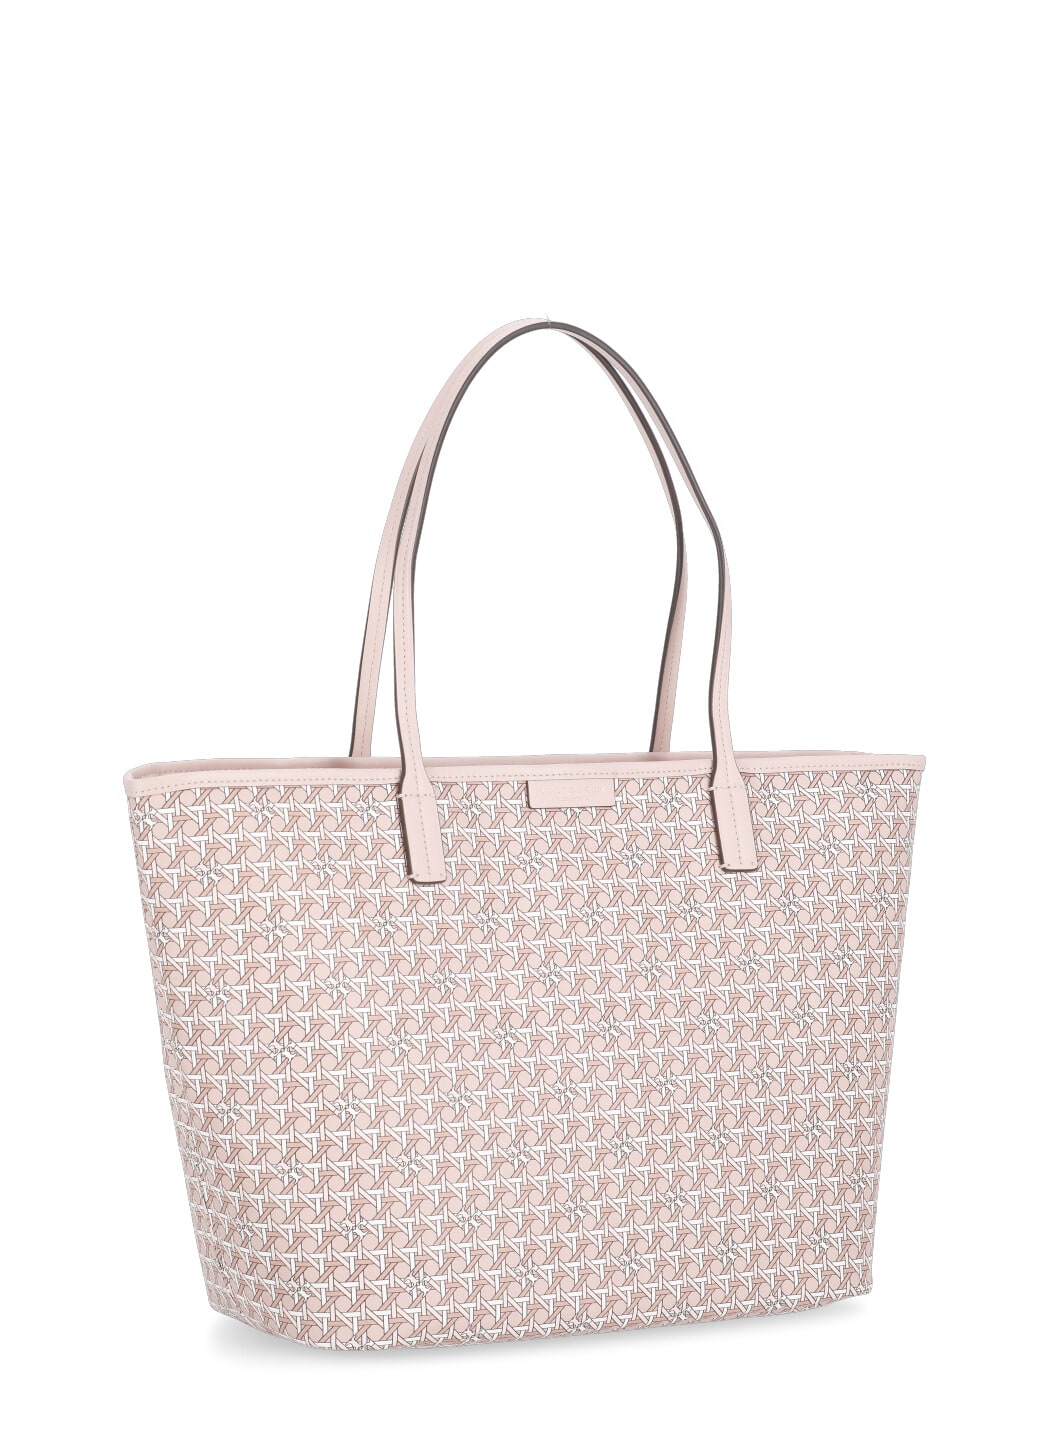 Tory Burch Ever-ready Tote Bag In Pink | ModeSens